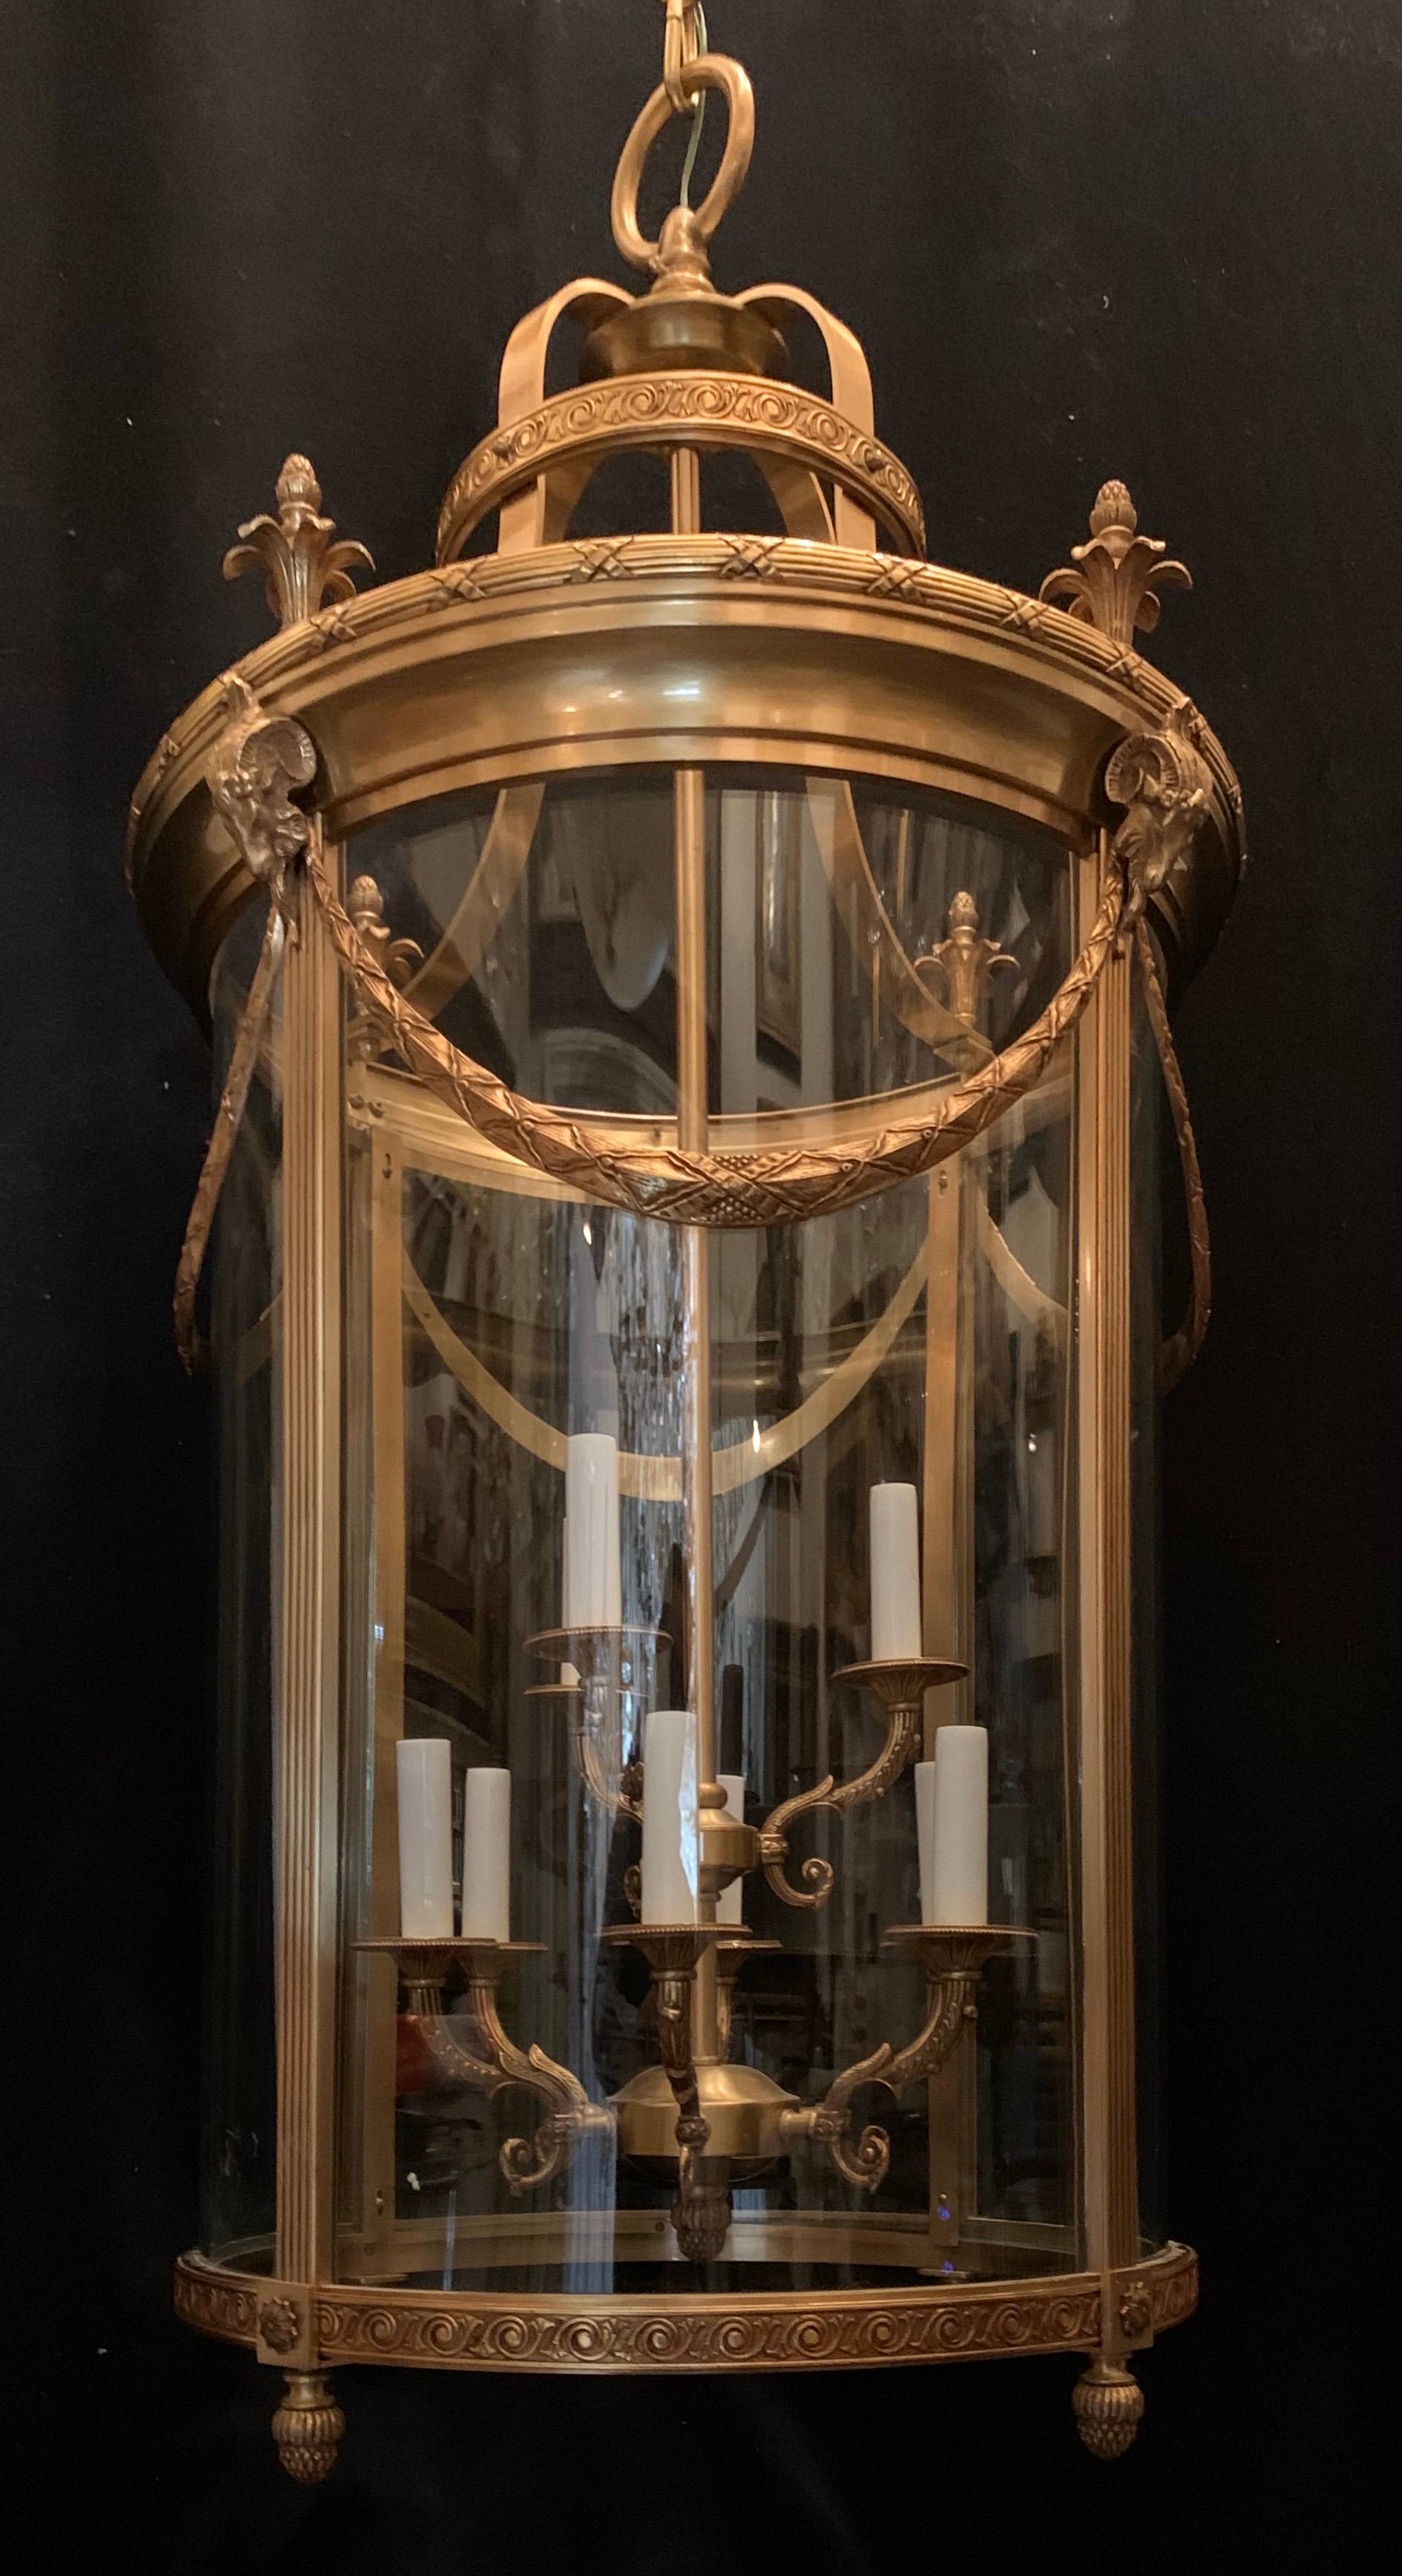 Elegant large gilt bronze Louis XVI neoclassical Empire style two-tier lantern fixture with curved glass panels, rewired with 9 candelabra lights and ready to install in an entry foyer.